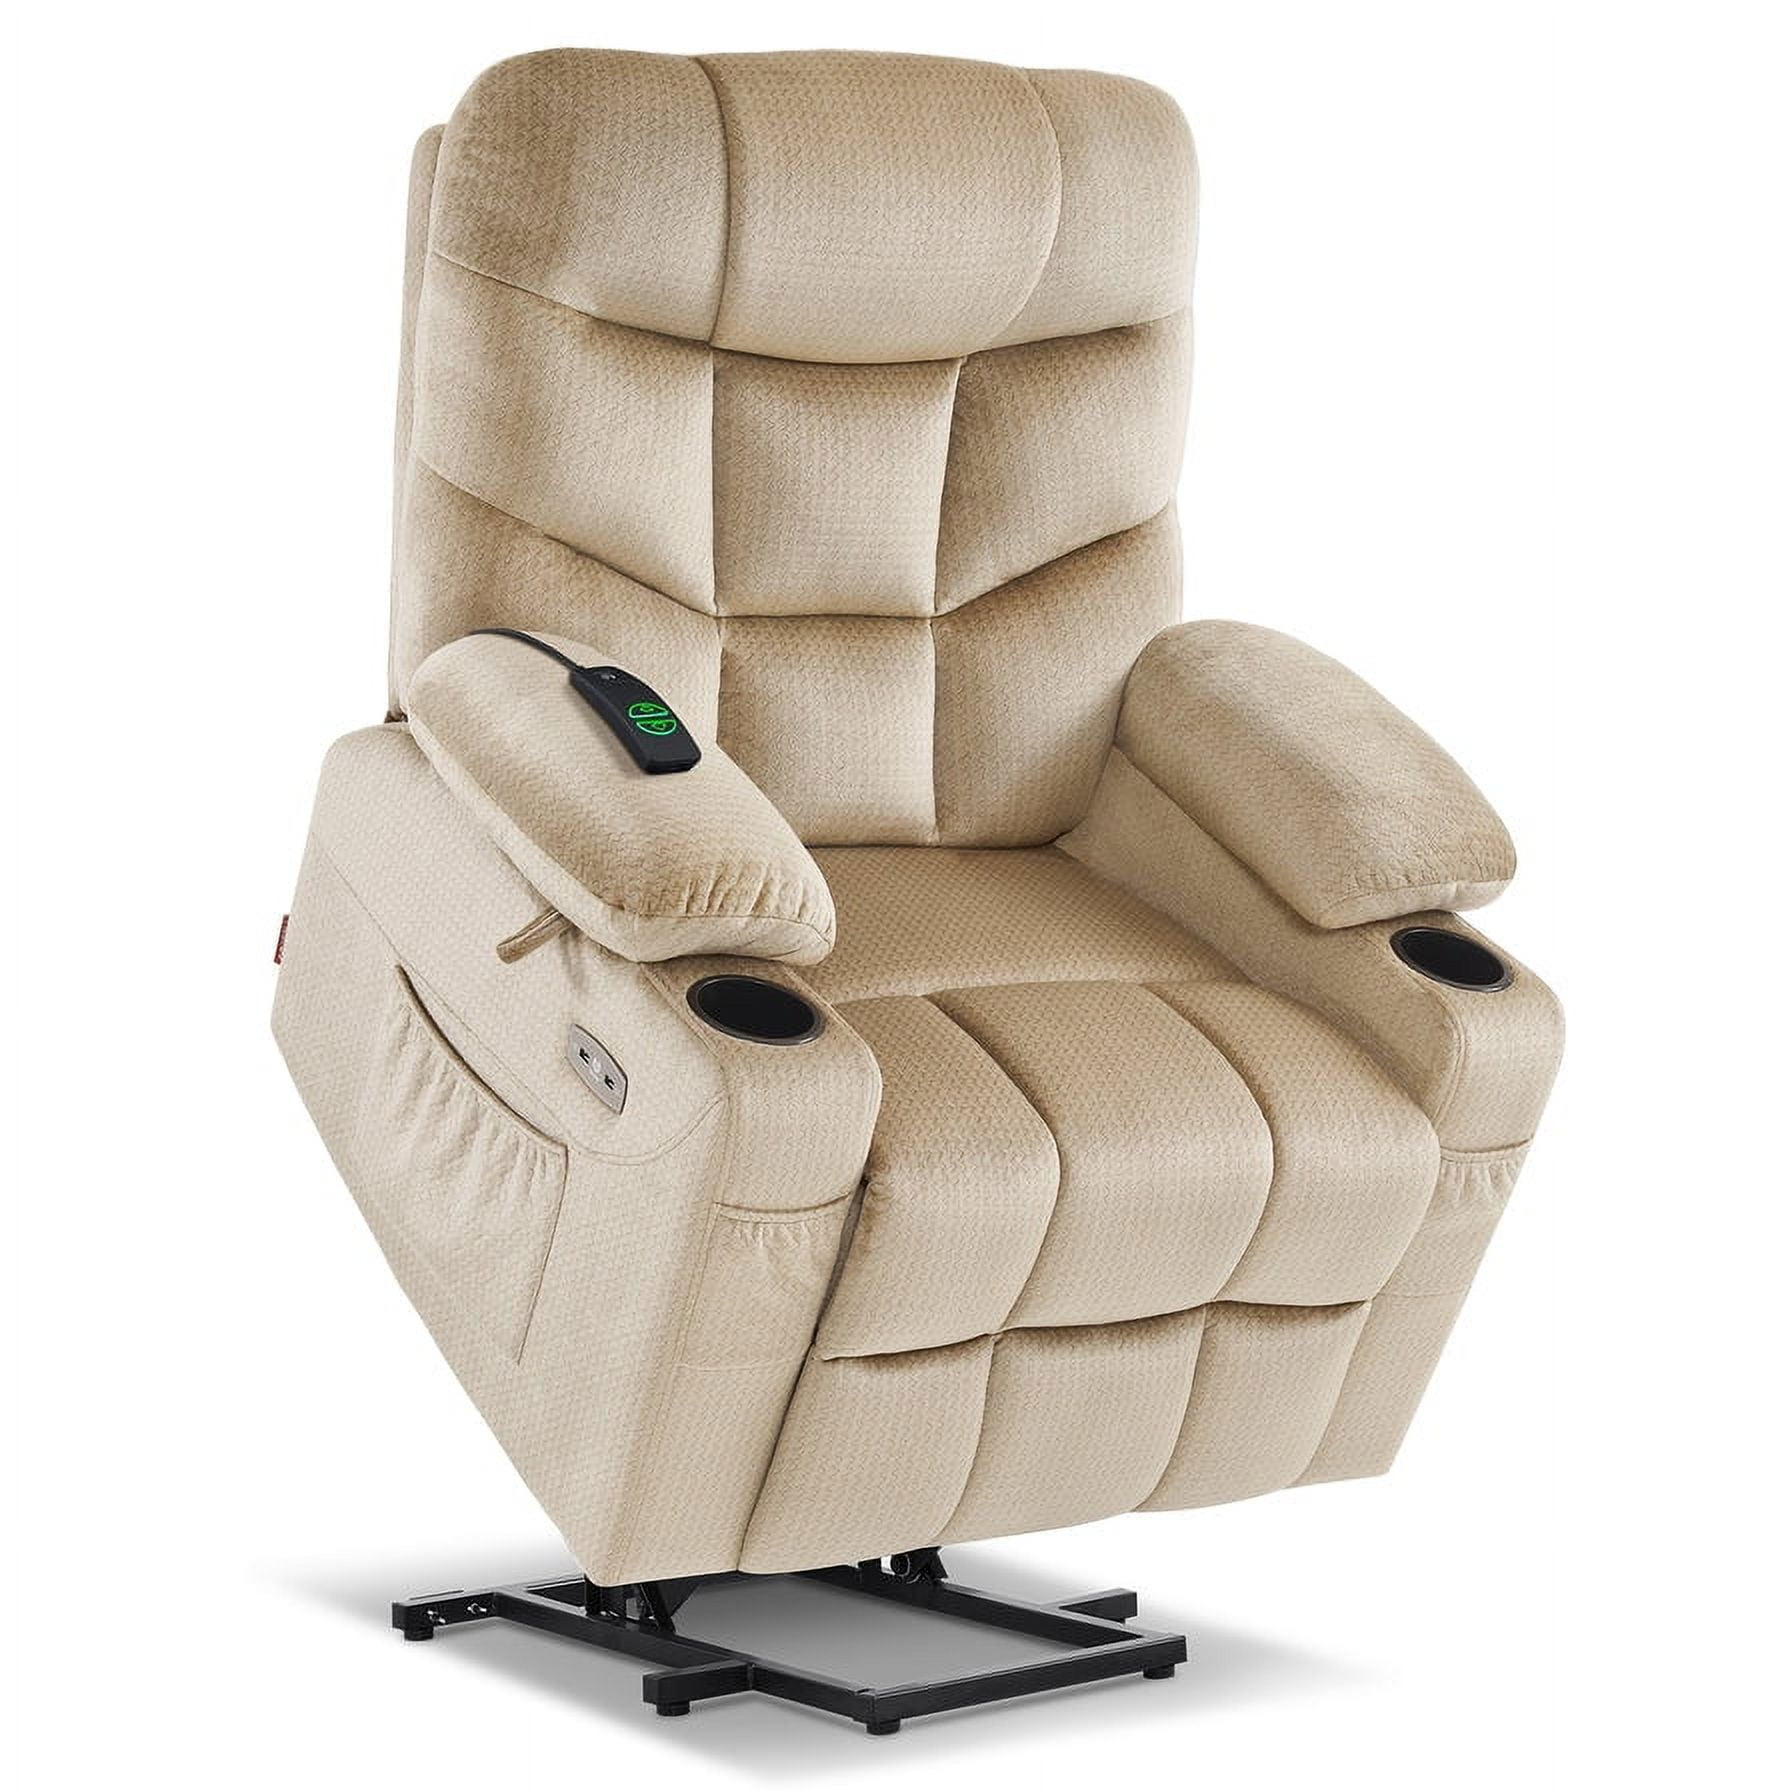 Invacare Deluxe 3 Position Hospital Recliner Chair IH6065A